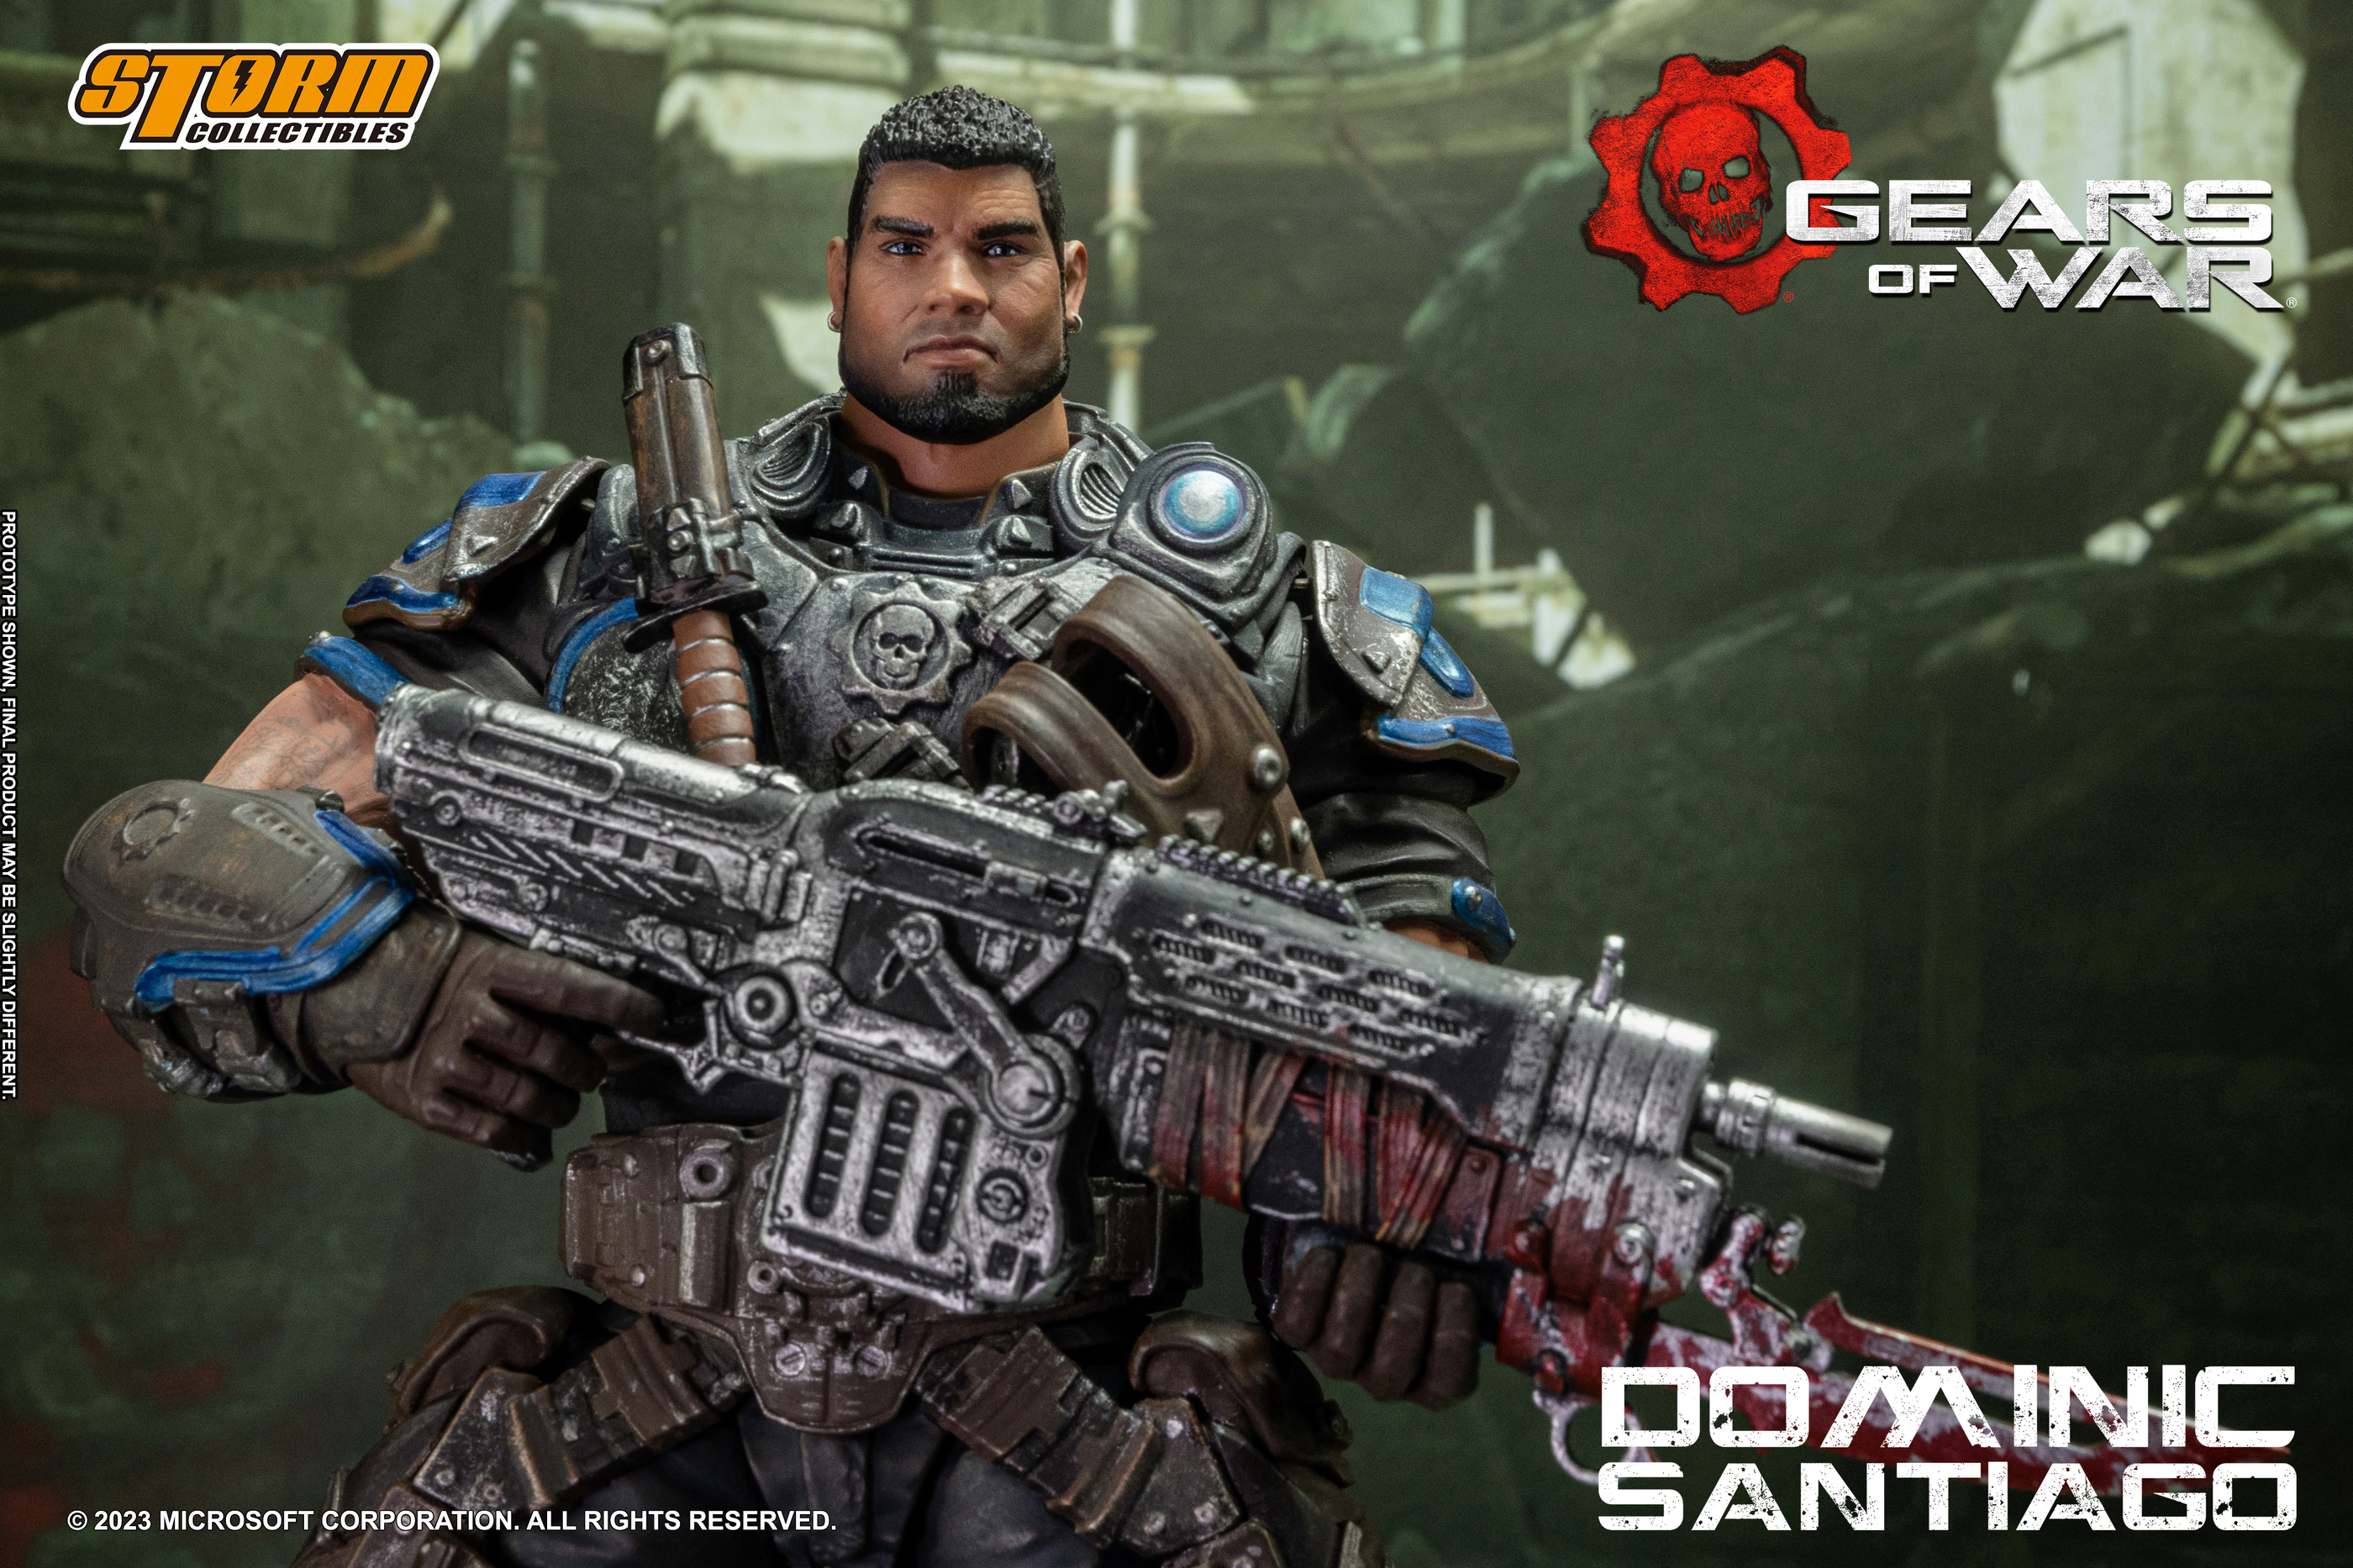 Gears Utility #Gears5 on X: Storm Collectibles have just dropped two new  @GearsofWar figures available for pre-order! 🔥 The only question is If  you could only have one, which would you pick